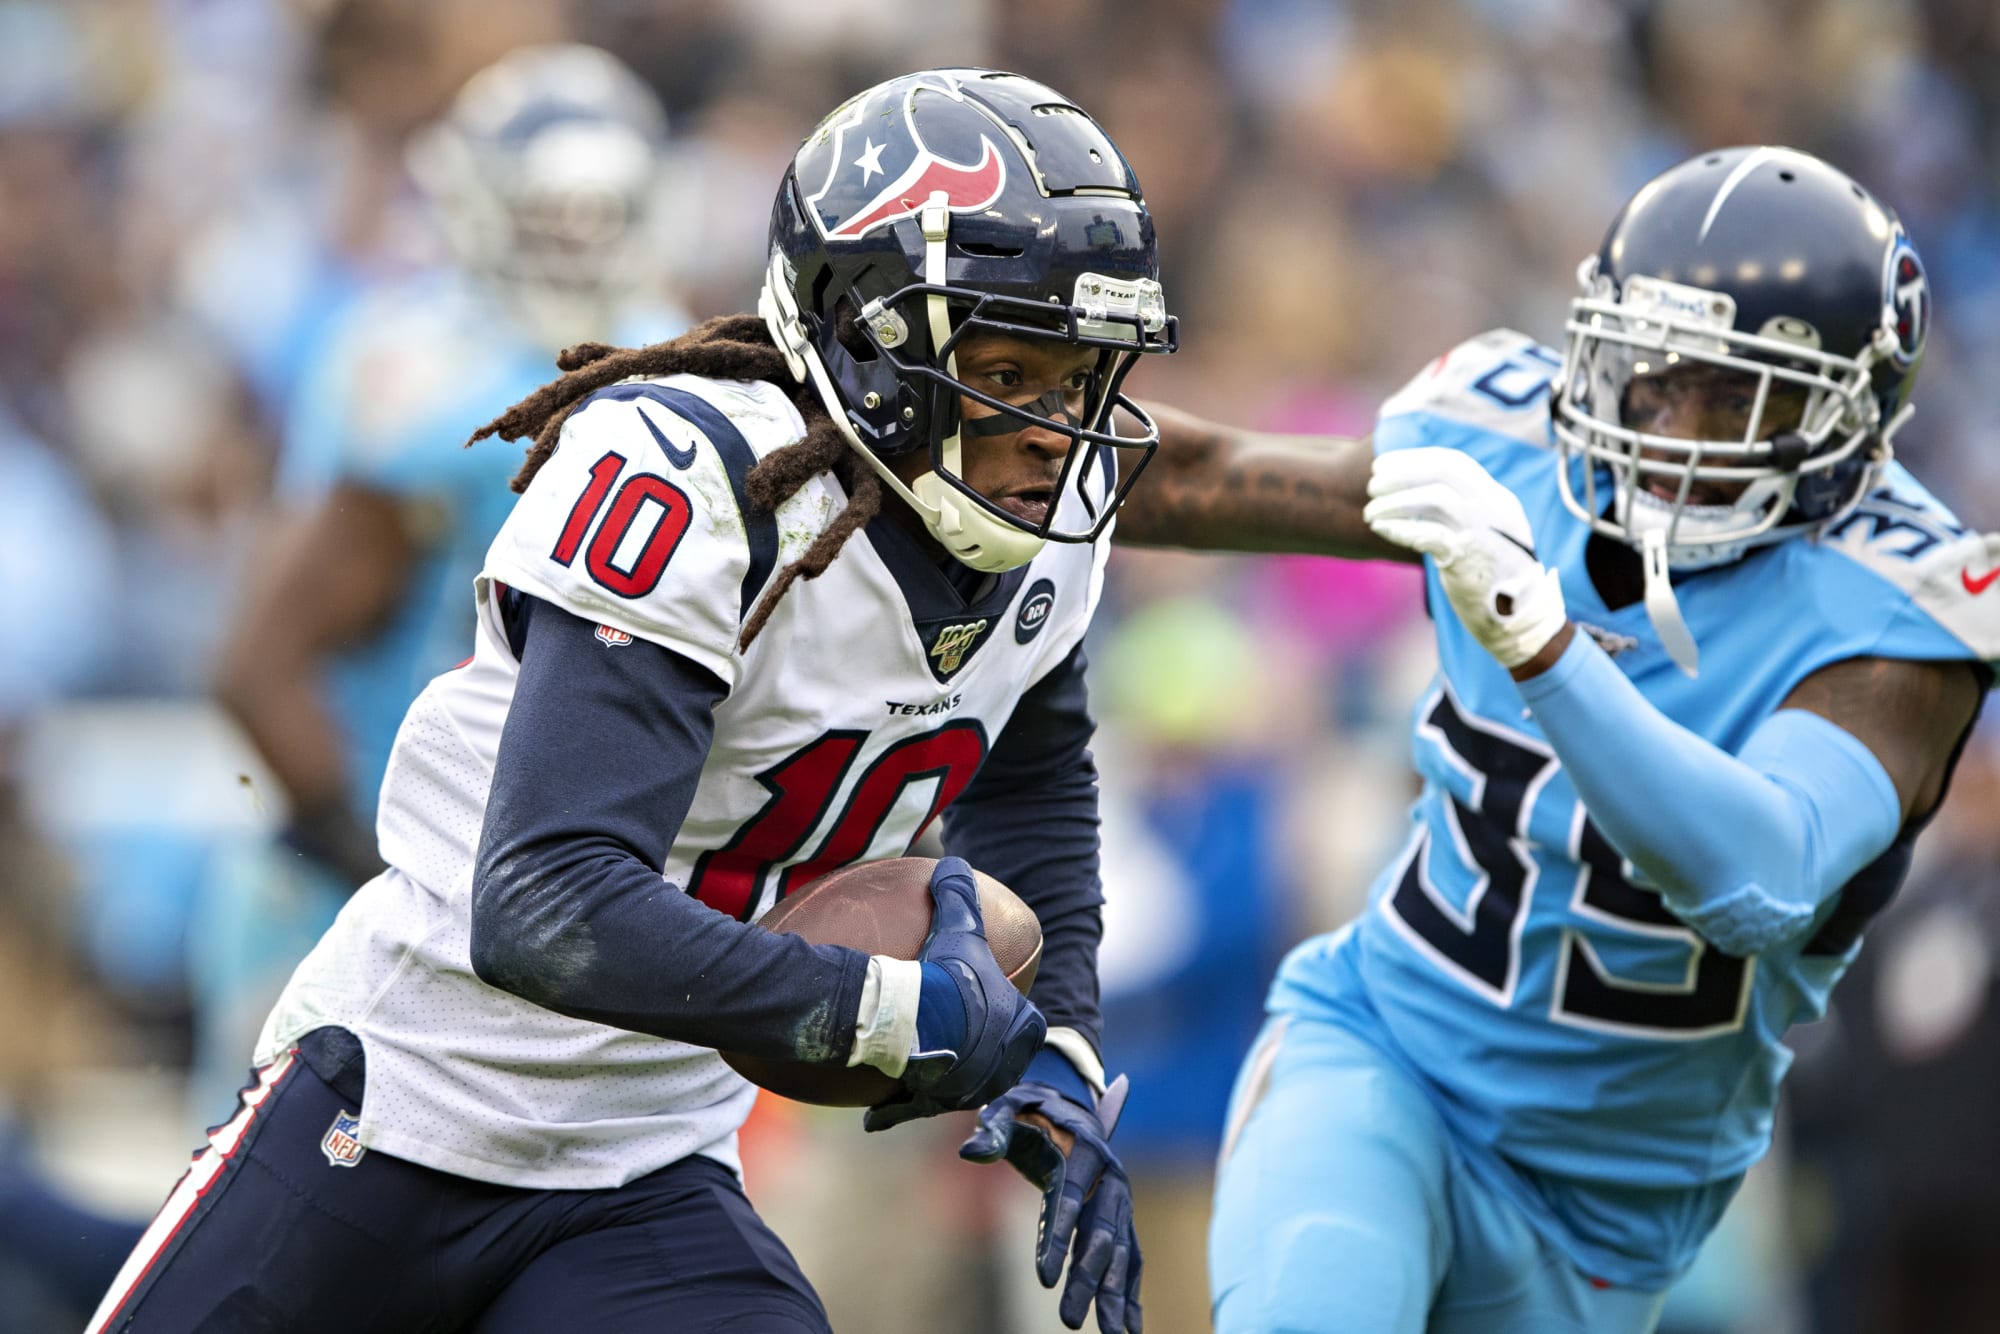 DeAndre Hopkins is firstteam AllPro for 3rd straight year